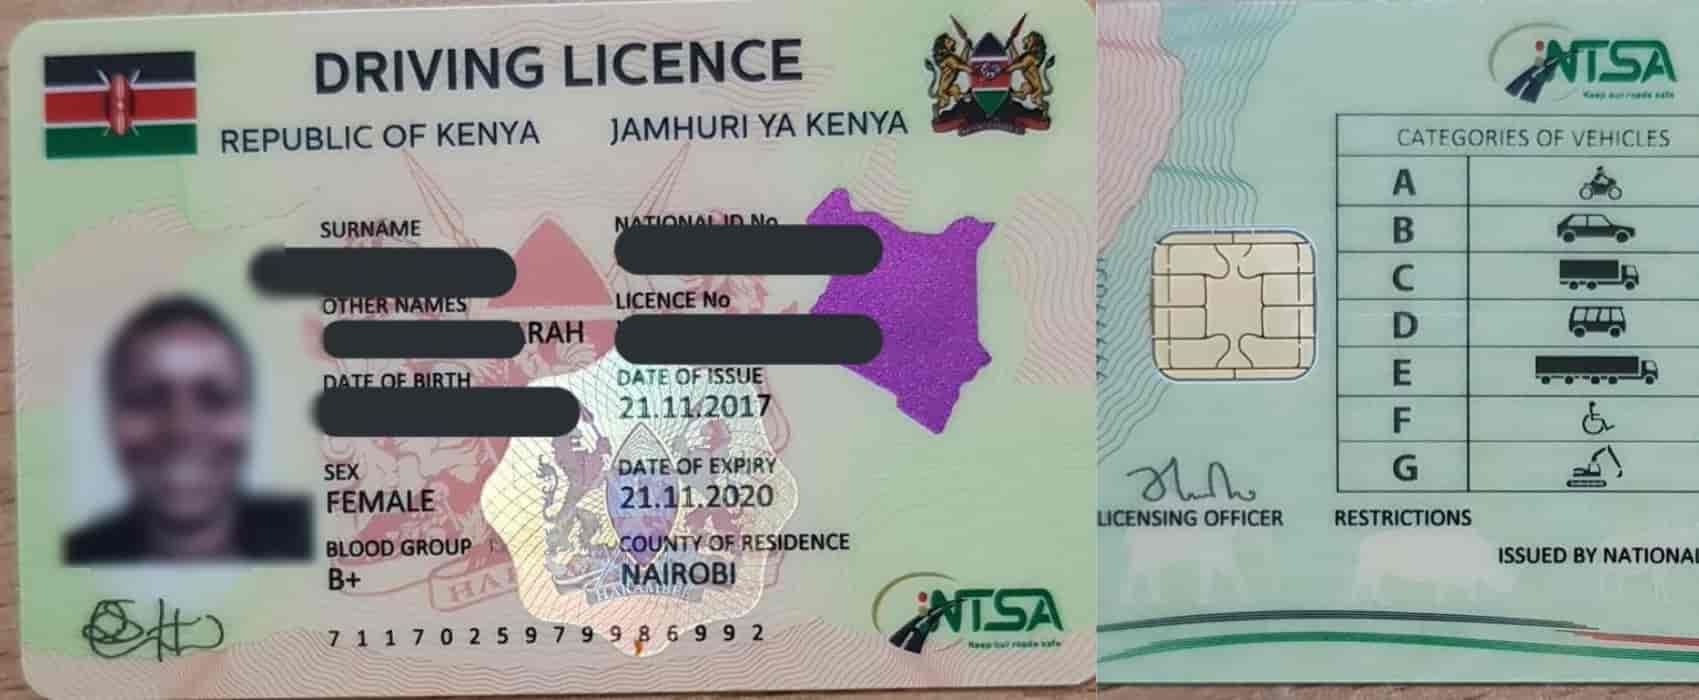 ntsa driving licence in Kenya, new classes of driving licence in kenya, digital driving license in kenya, interim driving licence kenya, driving license renewal kenya, search driving license in kenya, driving license in Kenya, how to check driving licence validity,